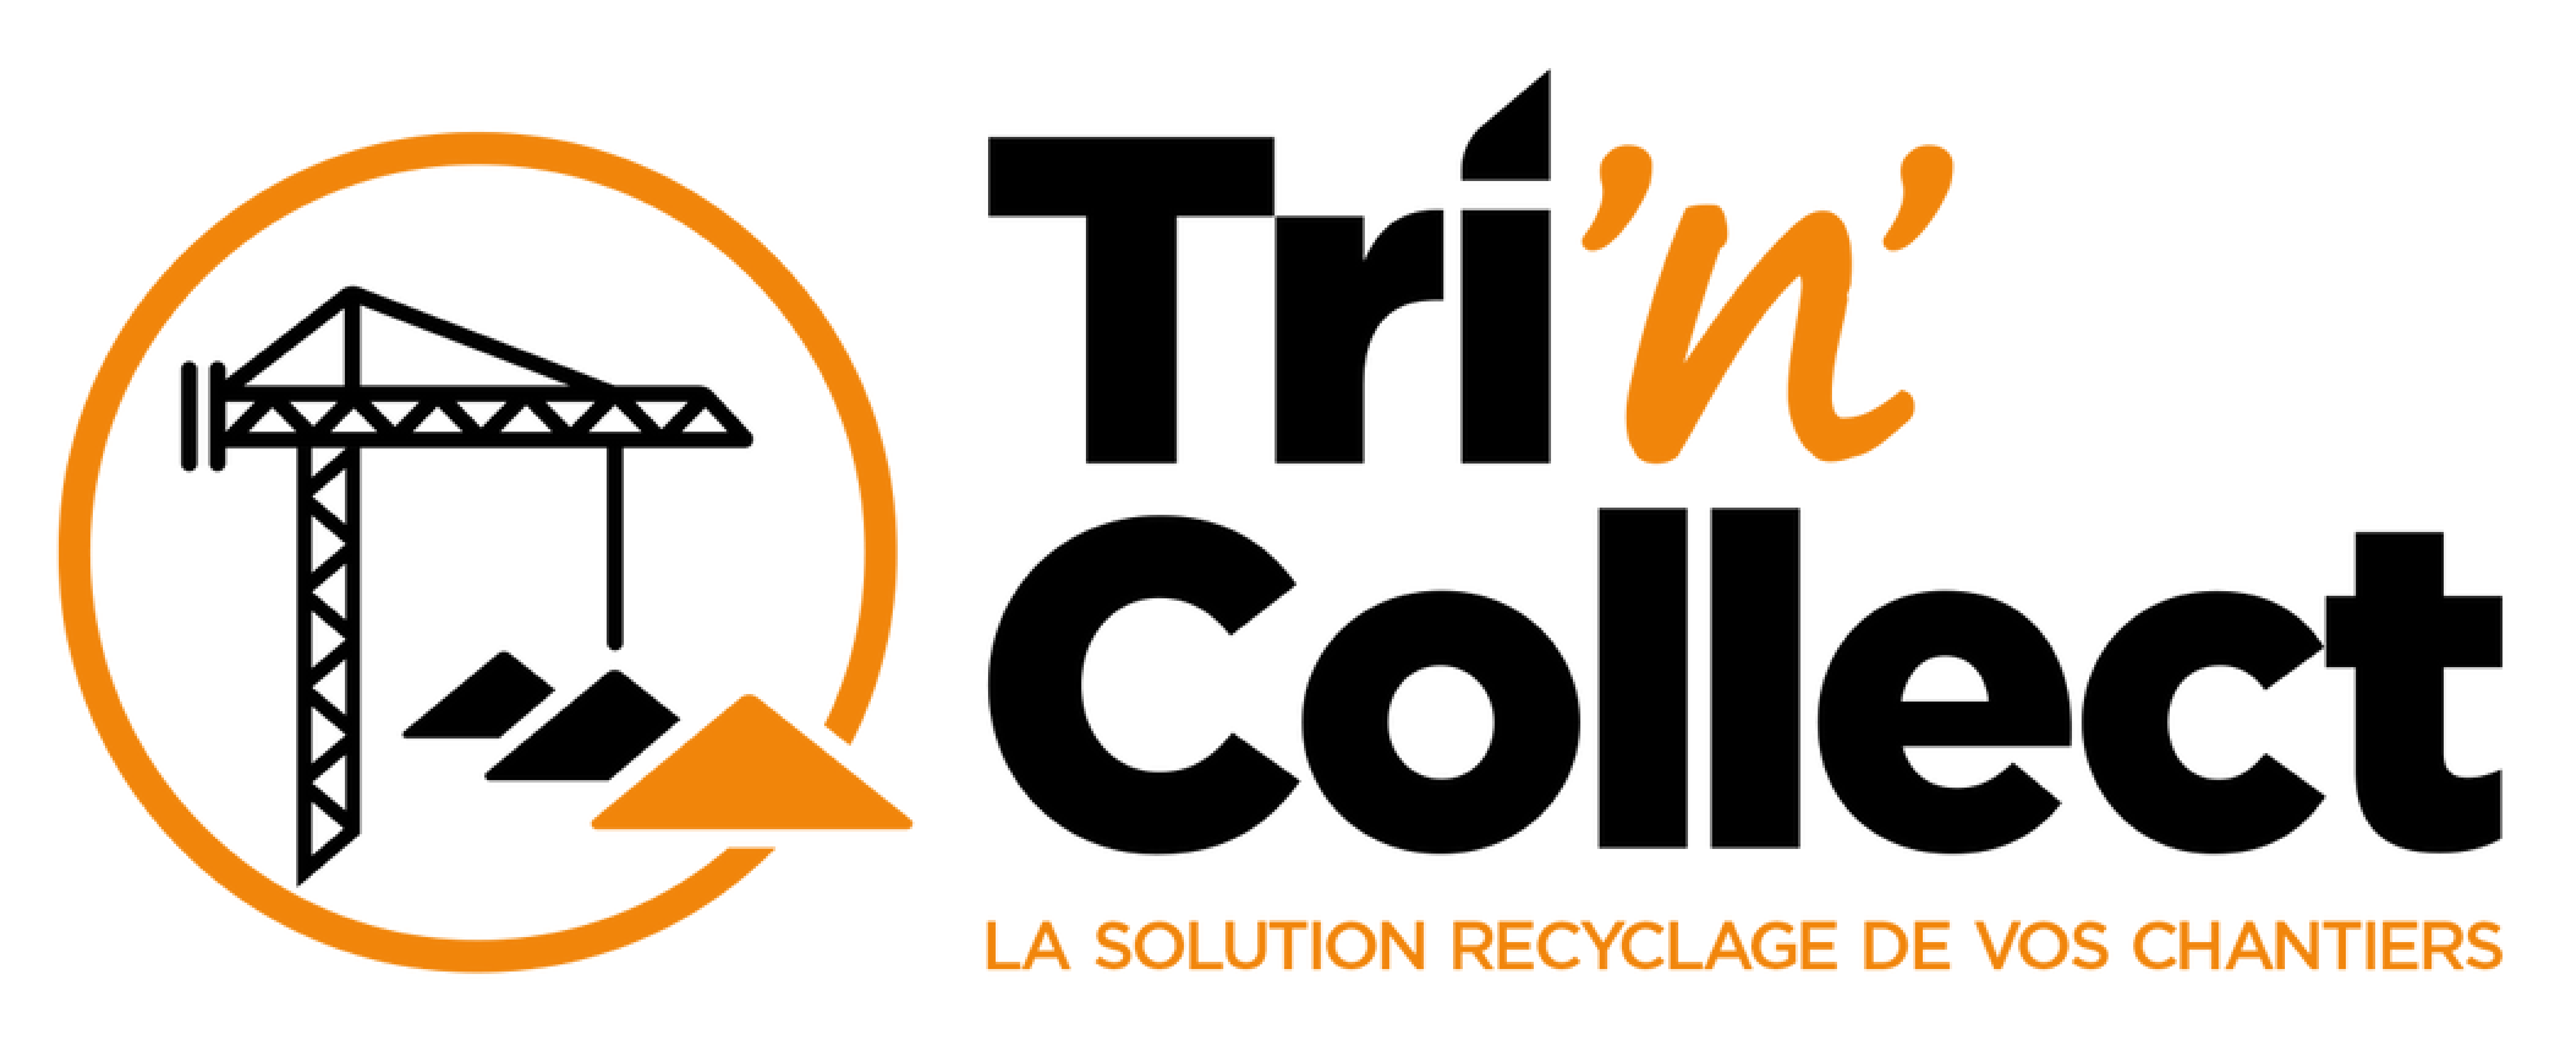 Tri'n'Collect